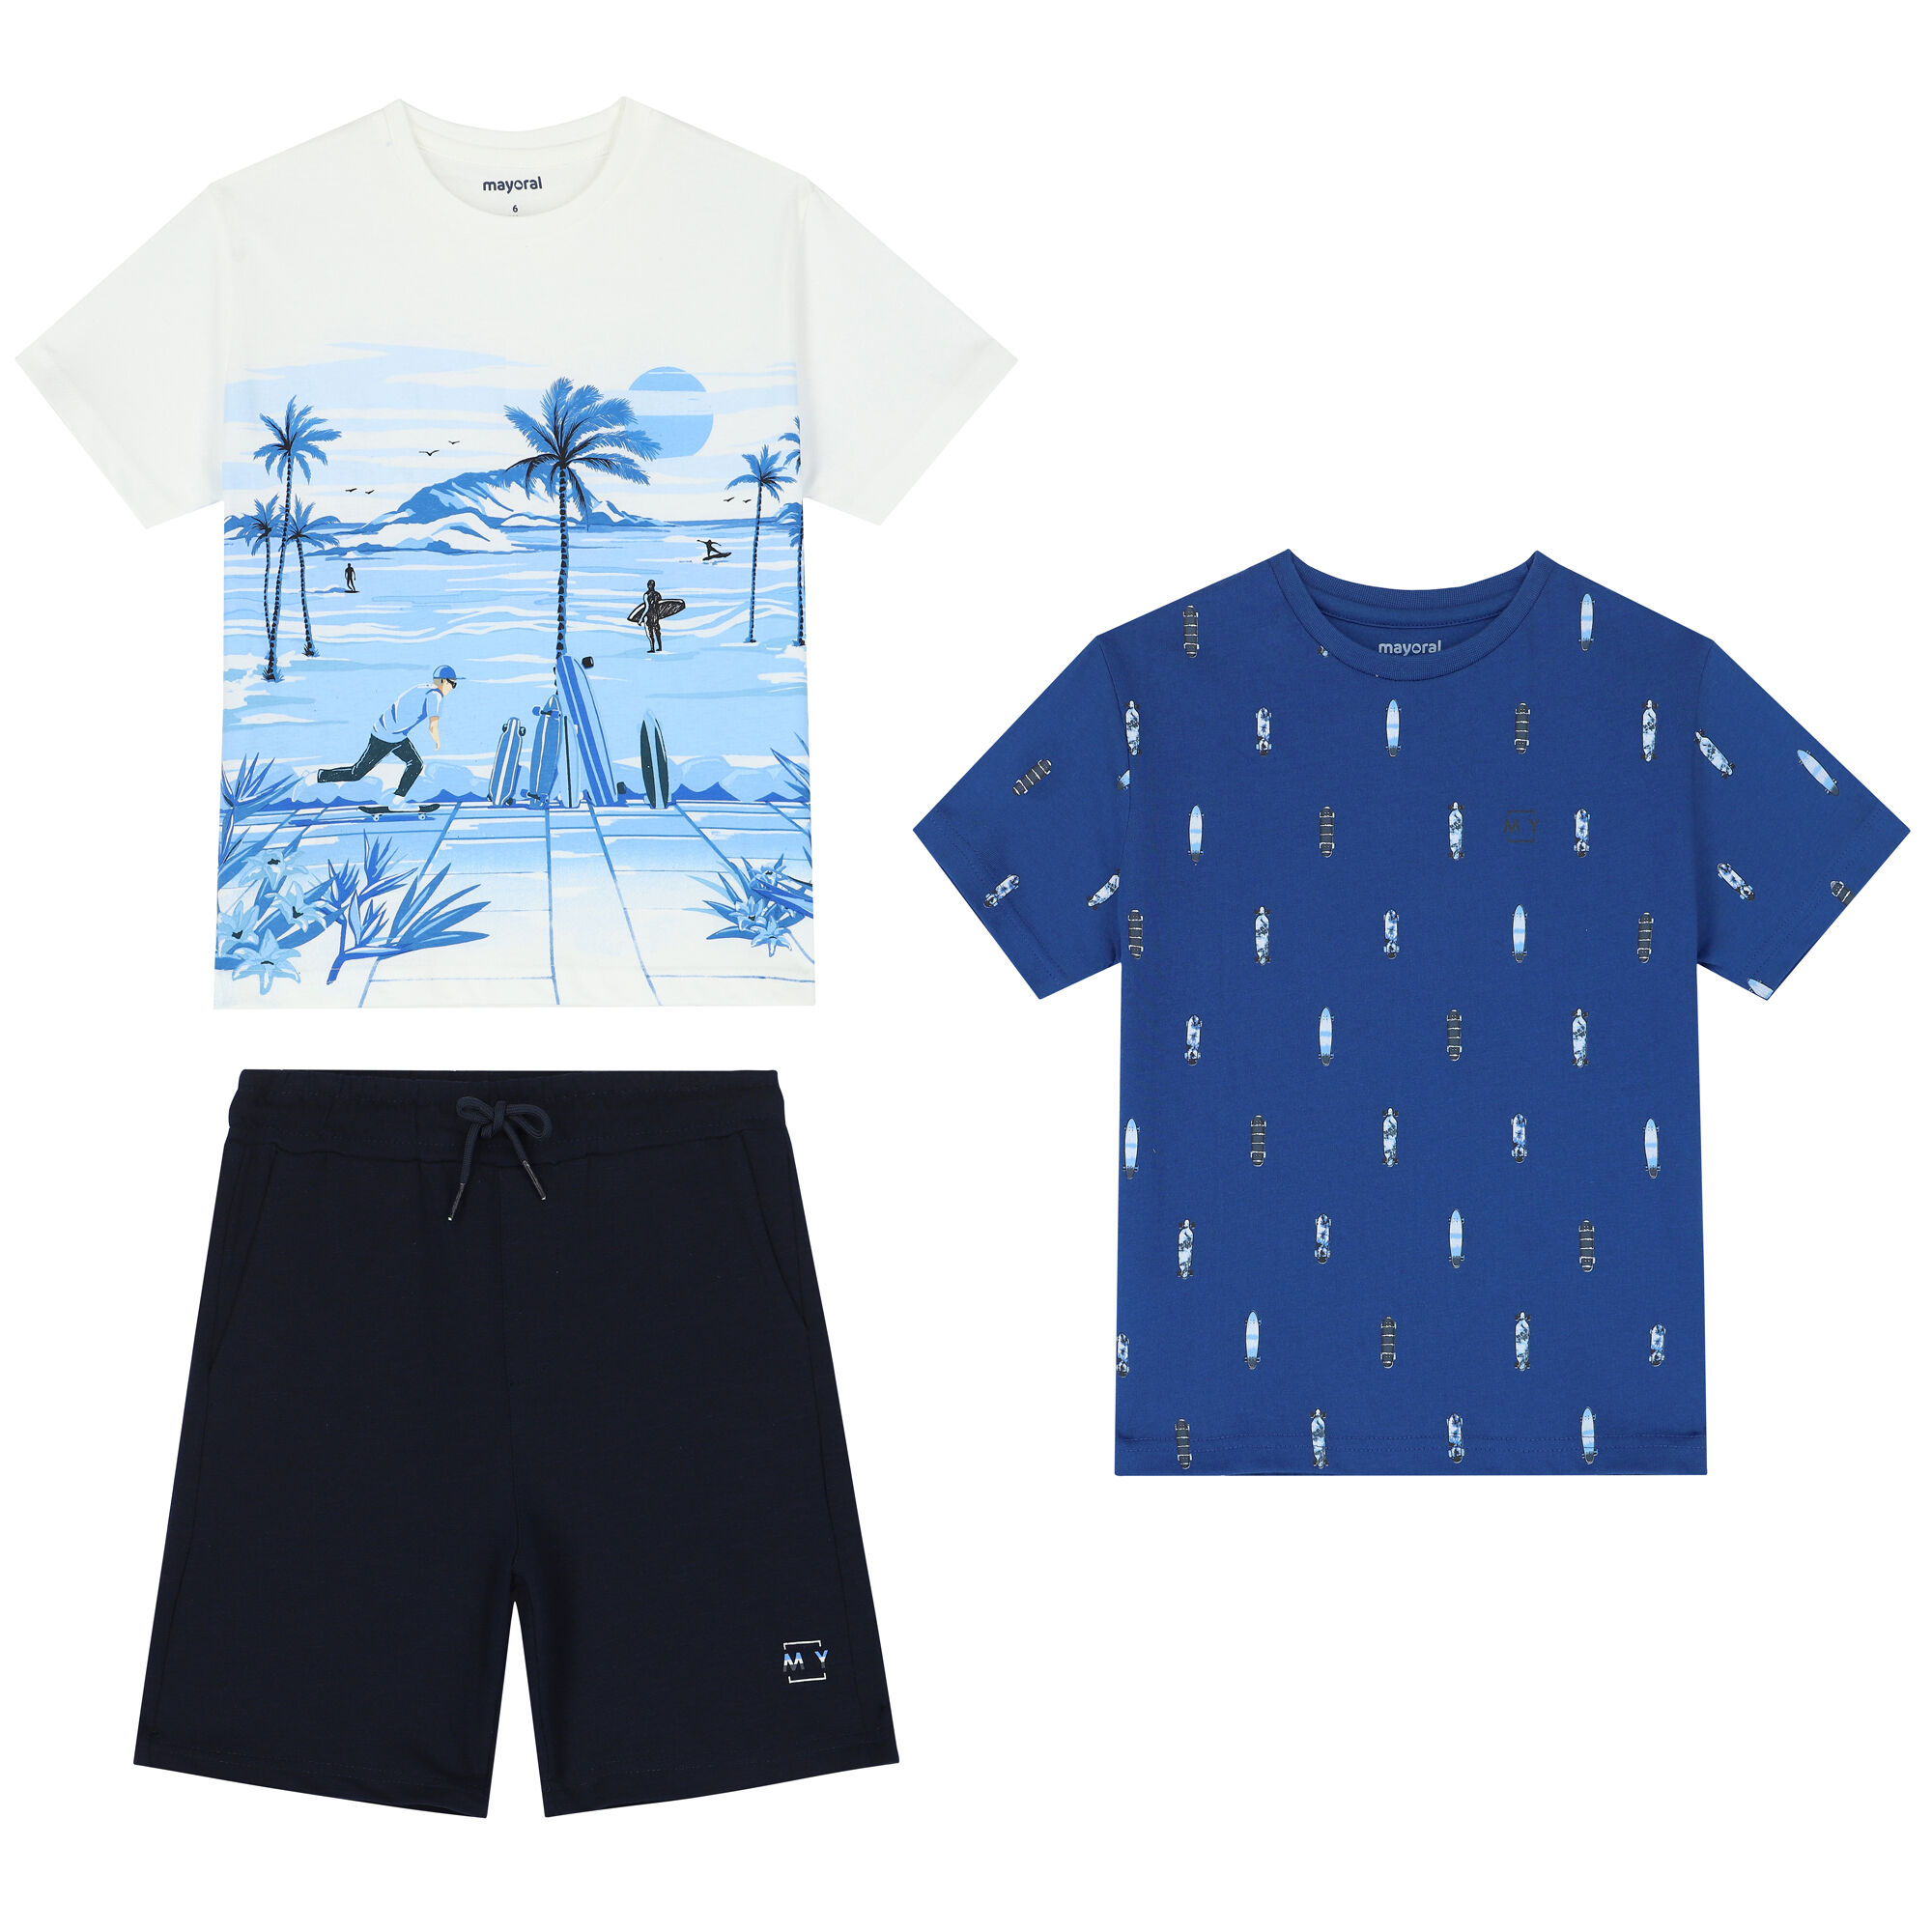 Designer MAYORAL Baby Boys Blue Swim short with T-Shirt WAS £25 Now £11.50 SALE 